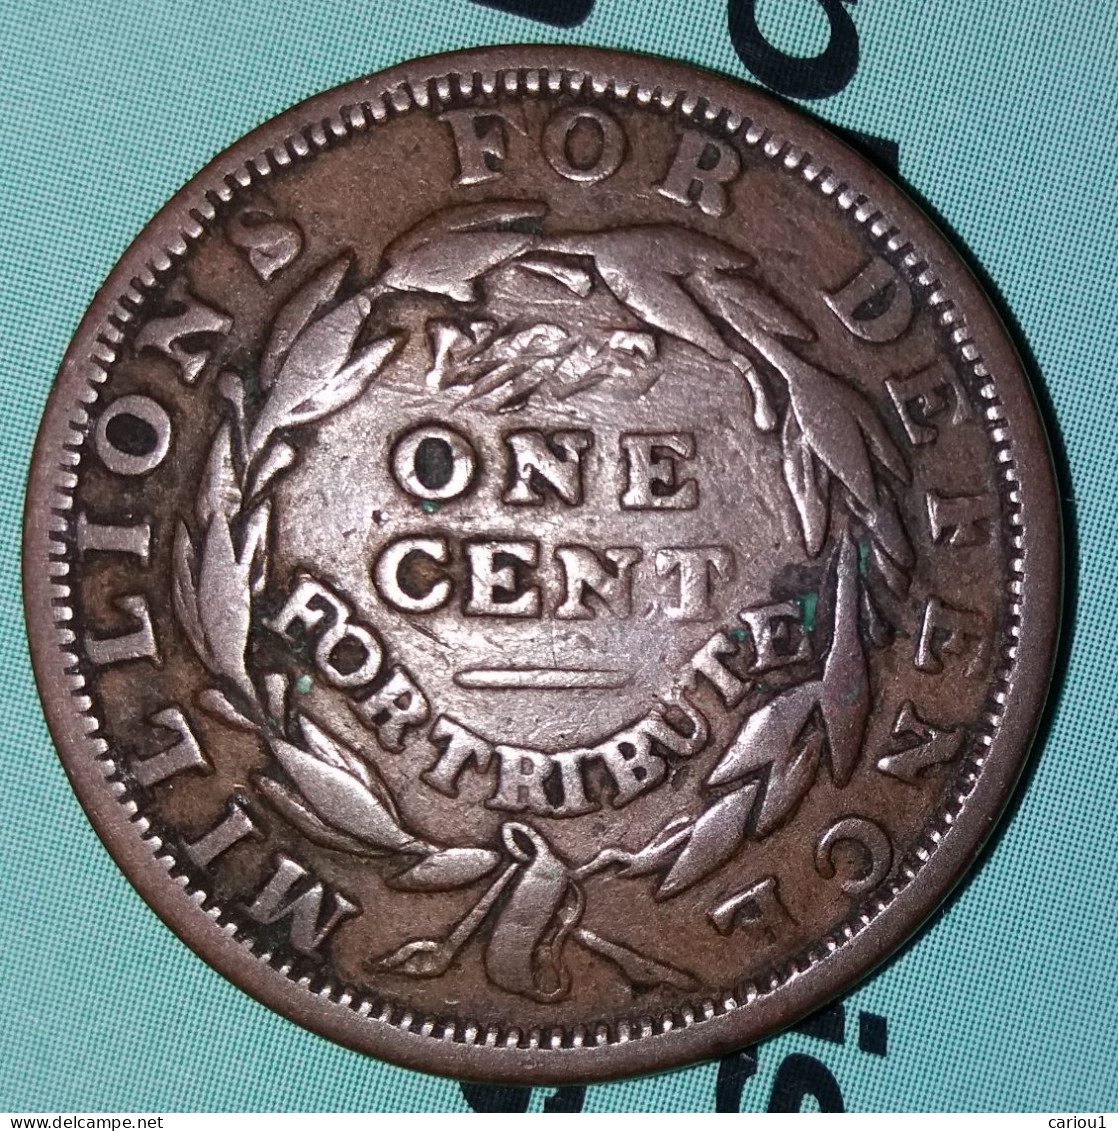 C1  USA Hard Time Token 1837 Millions For Defence Not One Cent For Tribute HT 47 Port Inclus France - Monedas/ De Necesidad